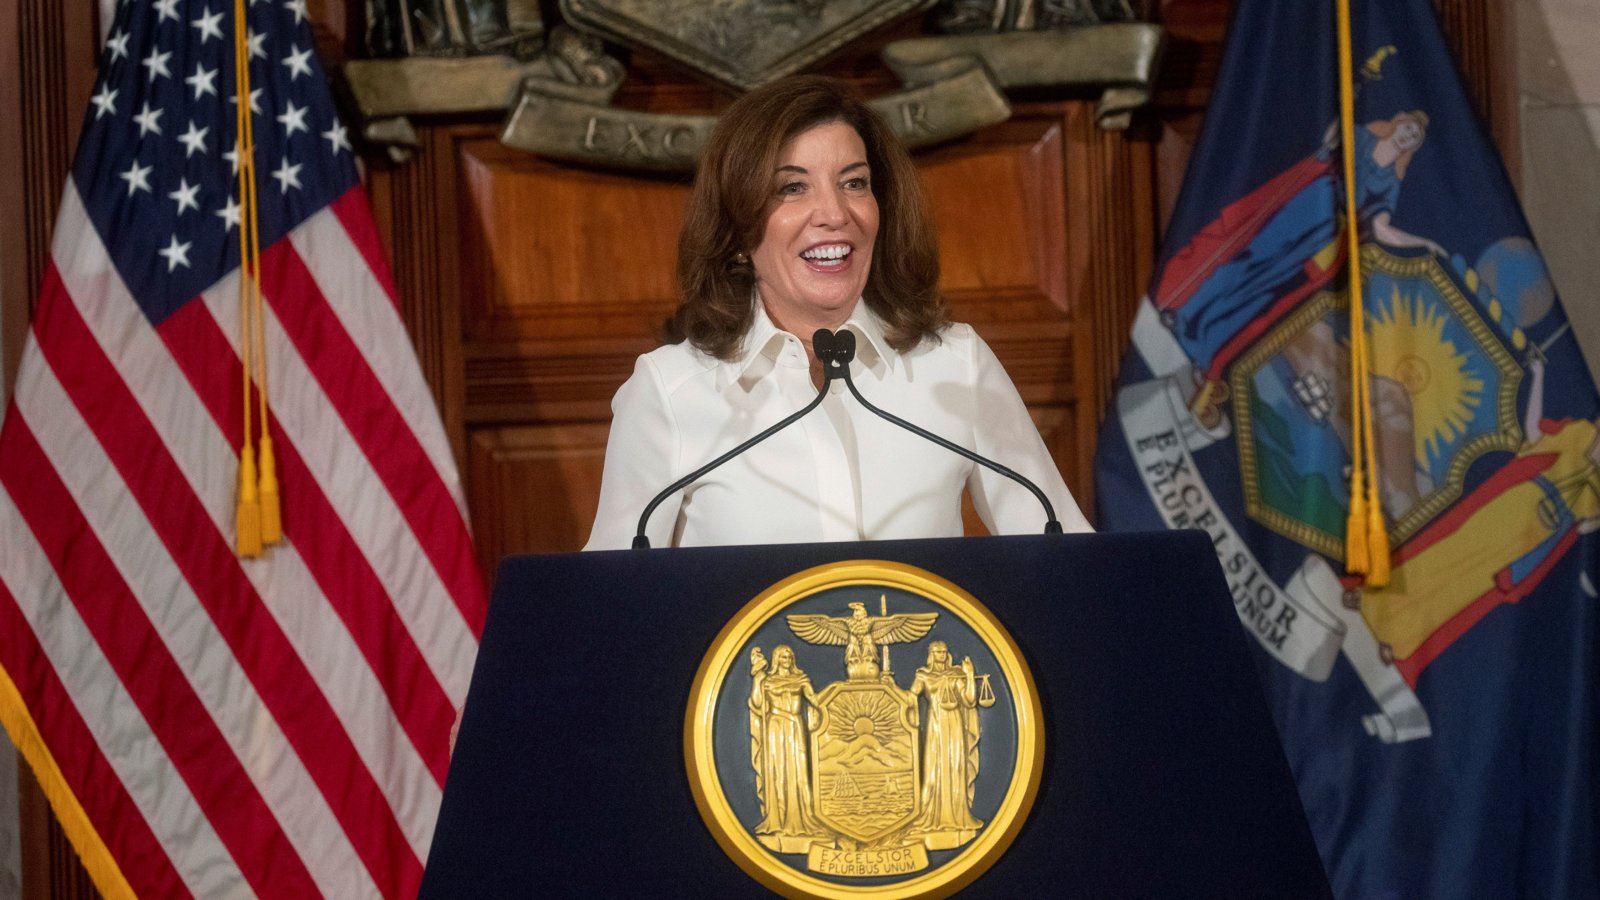 New York Governor Kathy Hochul reacts as she speaks to the media after taking part in a swearing-in ceremony to become New York State's 57th and first woman governor, in the Red Room at the New York State Capitol, in Albany, New York, U.S., August 24, 2021. REUTERS/Eduardo Munoz